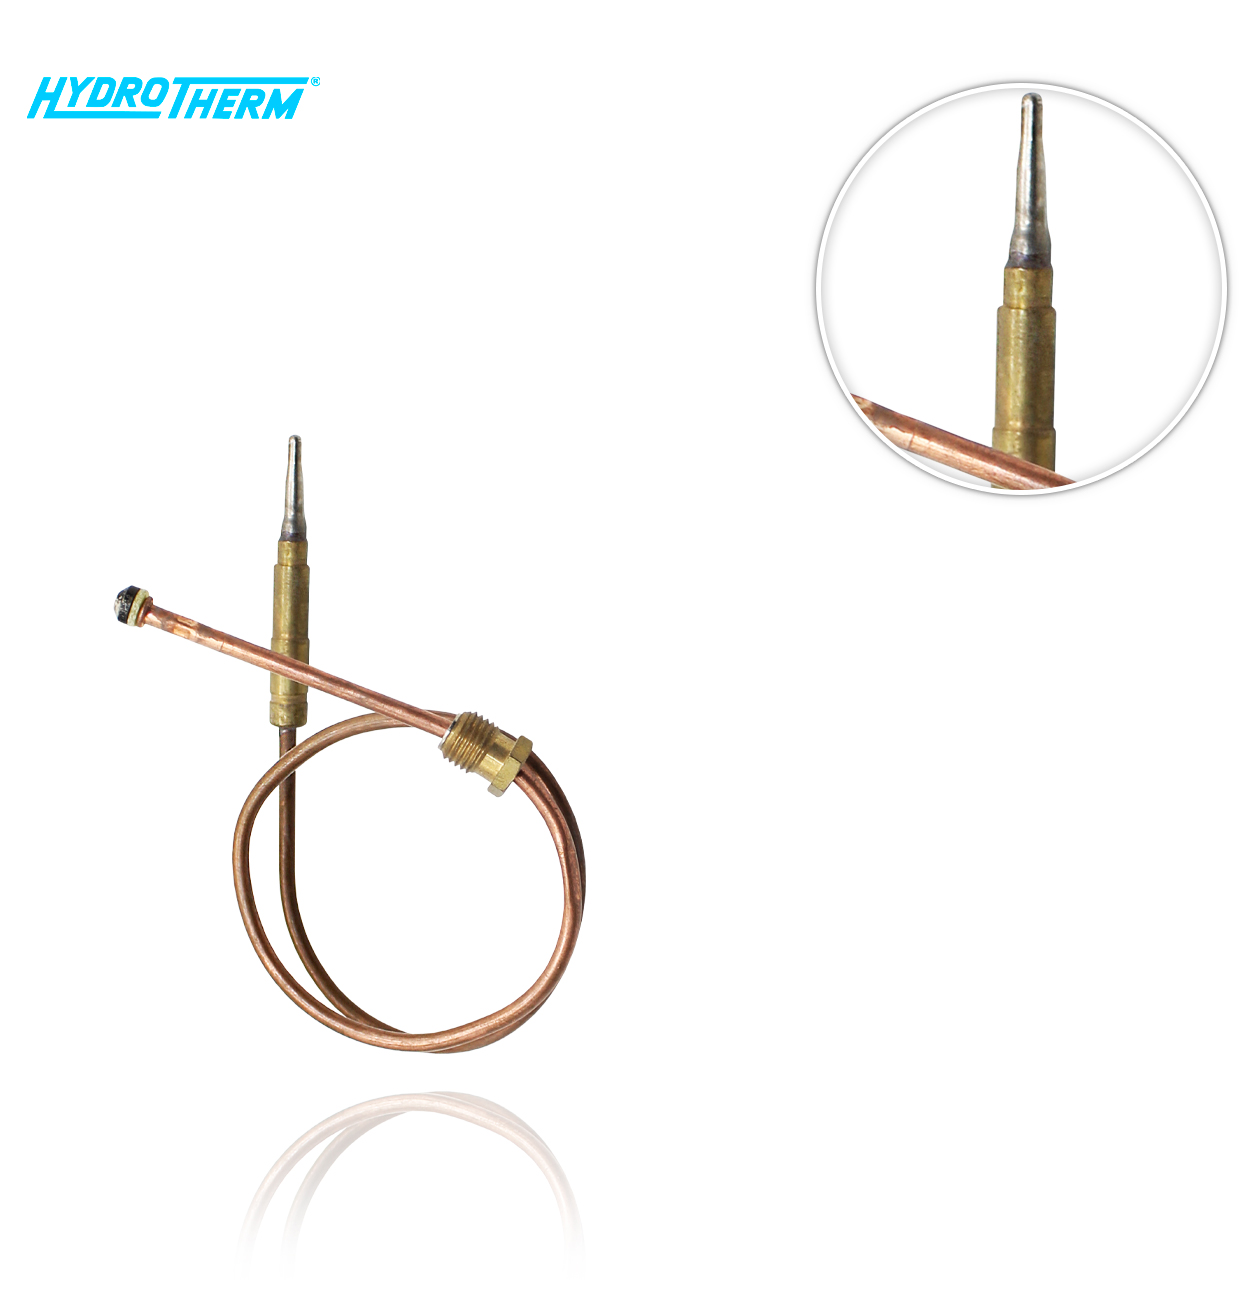 400mm HYDROTHERM THERMOCOUPLE